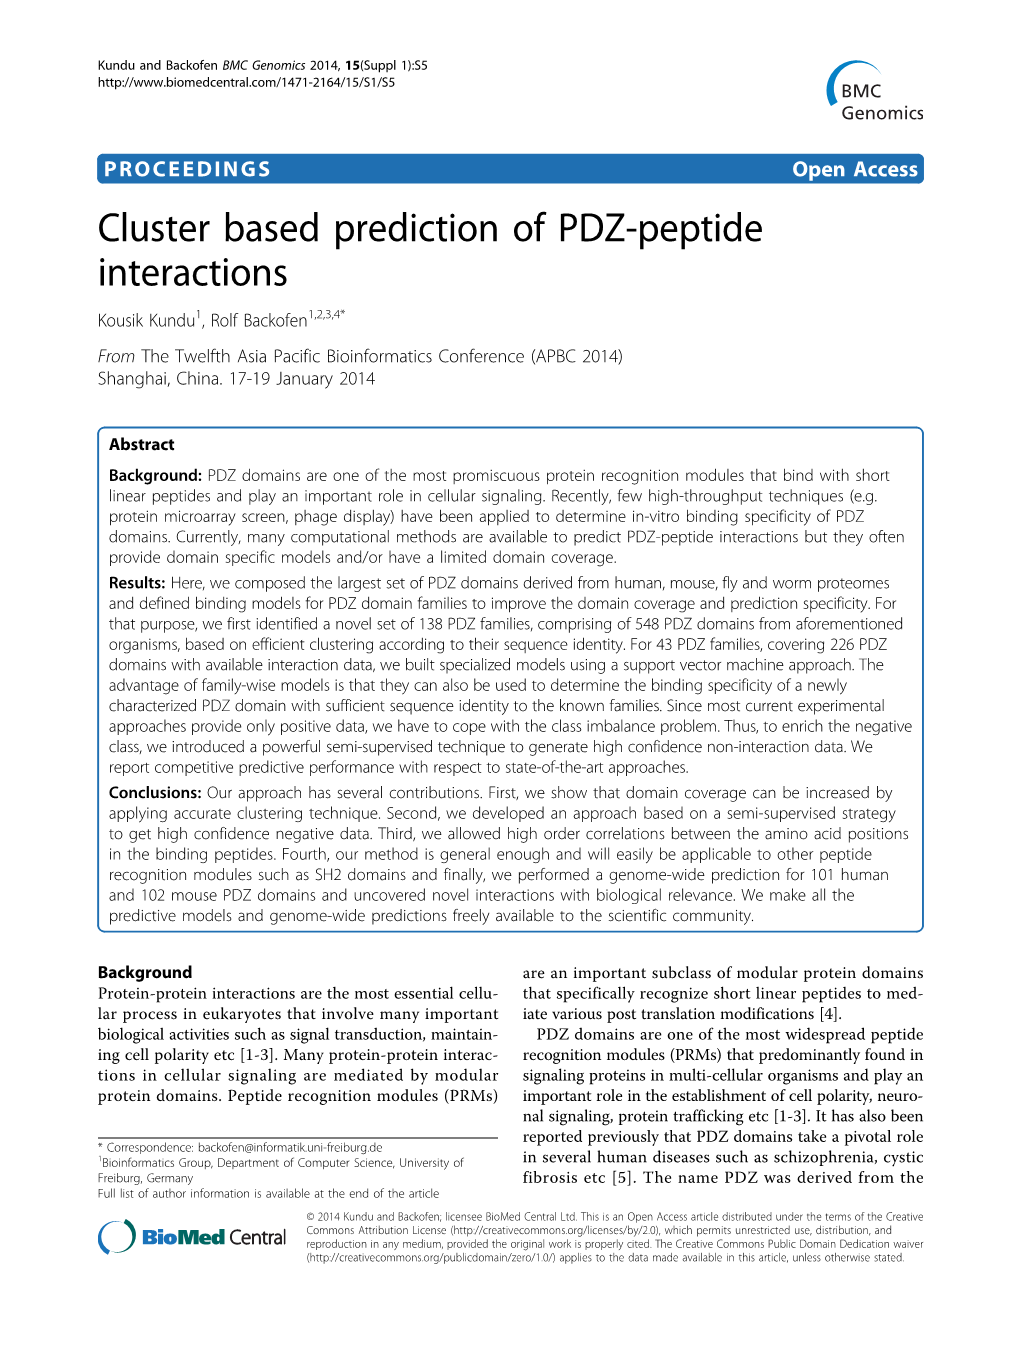 Cluster Based Prediction of PDZ-Peptide Interactions